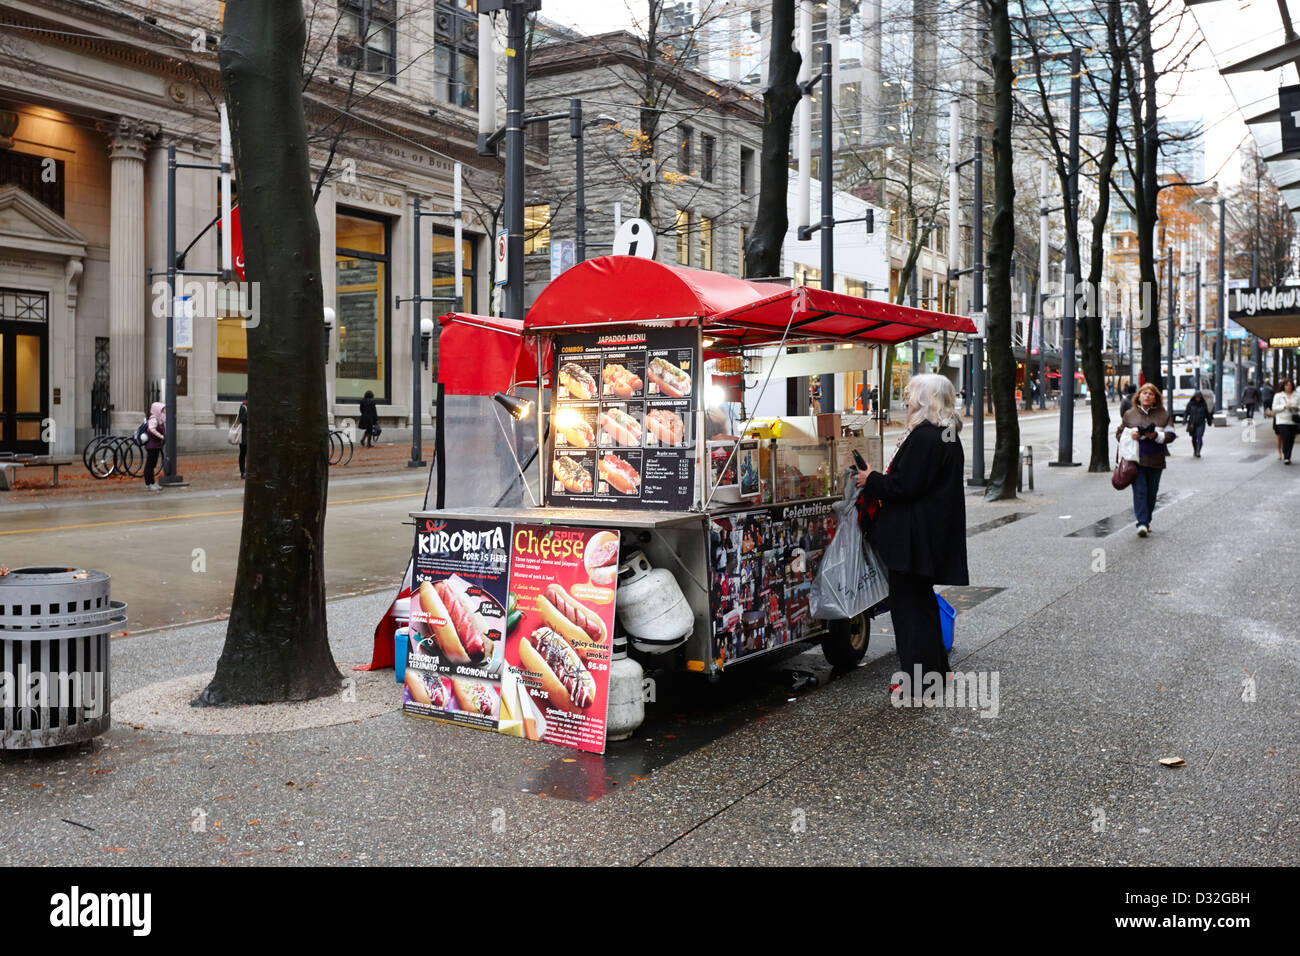 japadog fast food hot dog stand stall on granville street Vancouver BC Canada Stock Photo